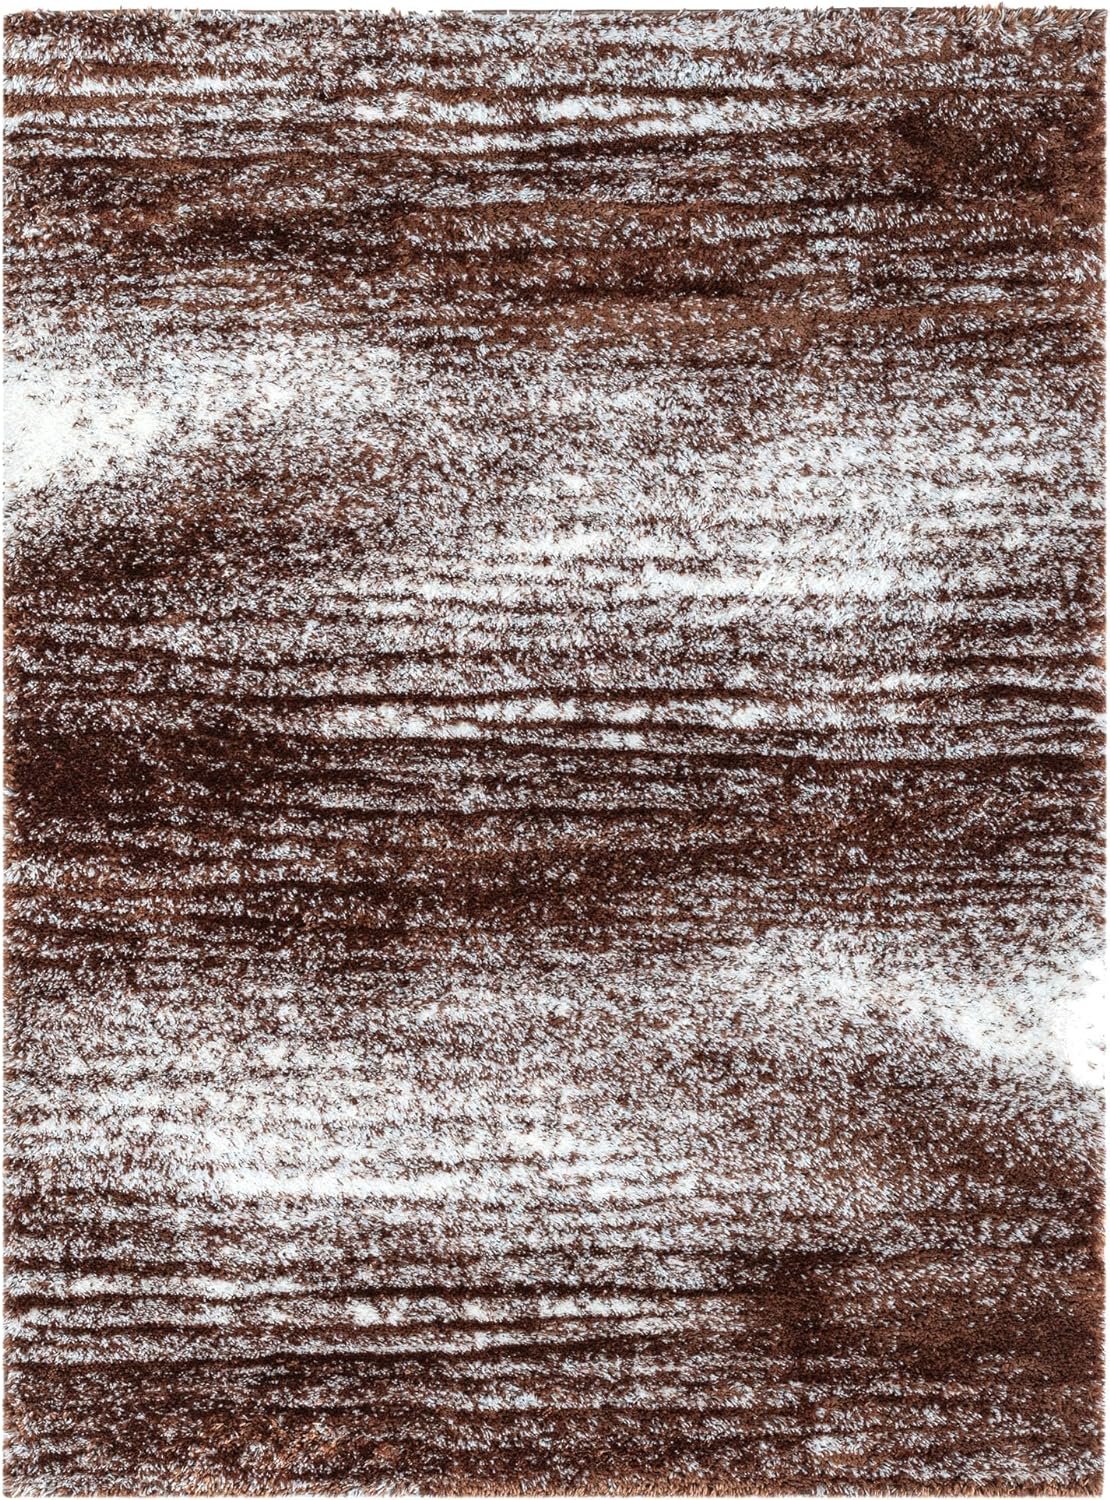 HR Luxurious Beige Shaggy Rug with Deep Pile - Soft Plush Texture, Abstract Pattern, Durable & Comfortable, Perfect for Living Room and Bedroom Decor#26228